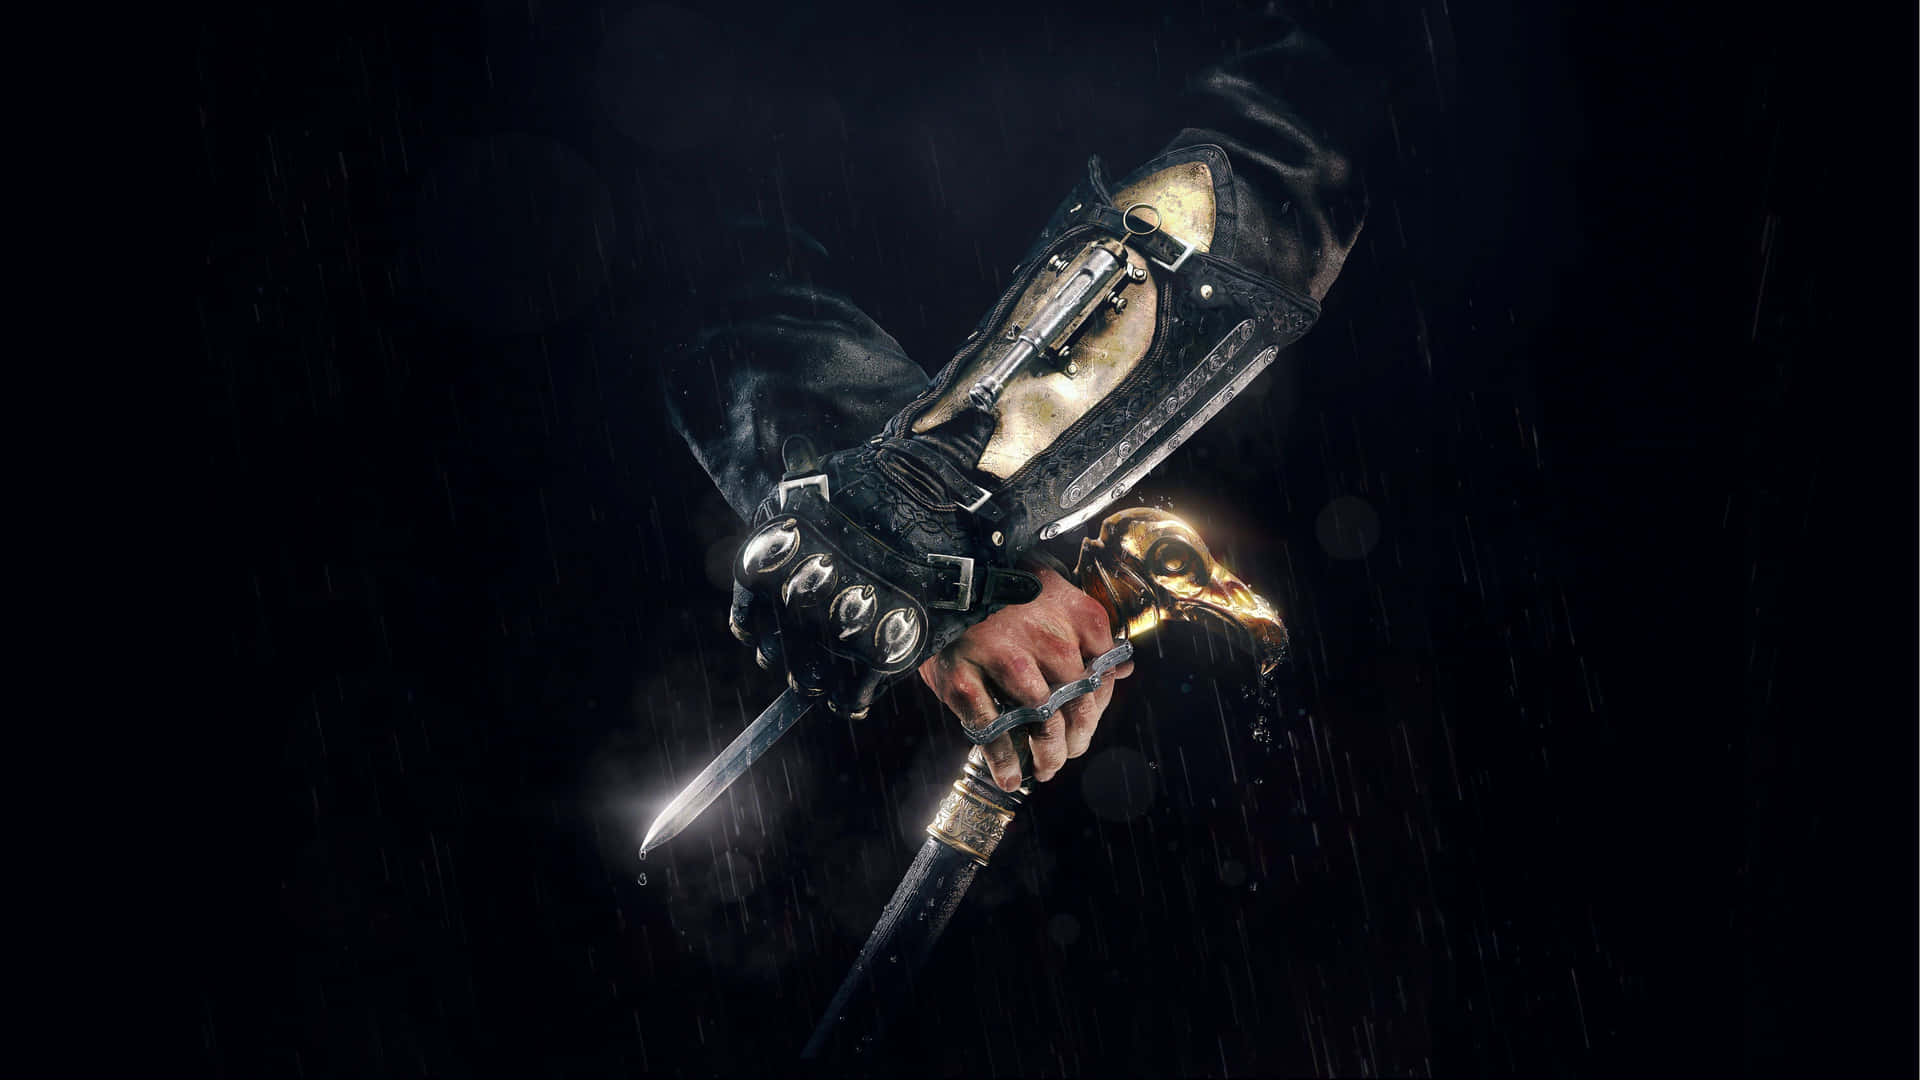 Assassin's Creed Syndicate - Evie and Jacob Frye in Action in Victorian London Wallpaper